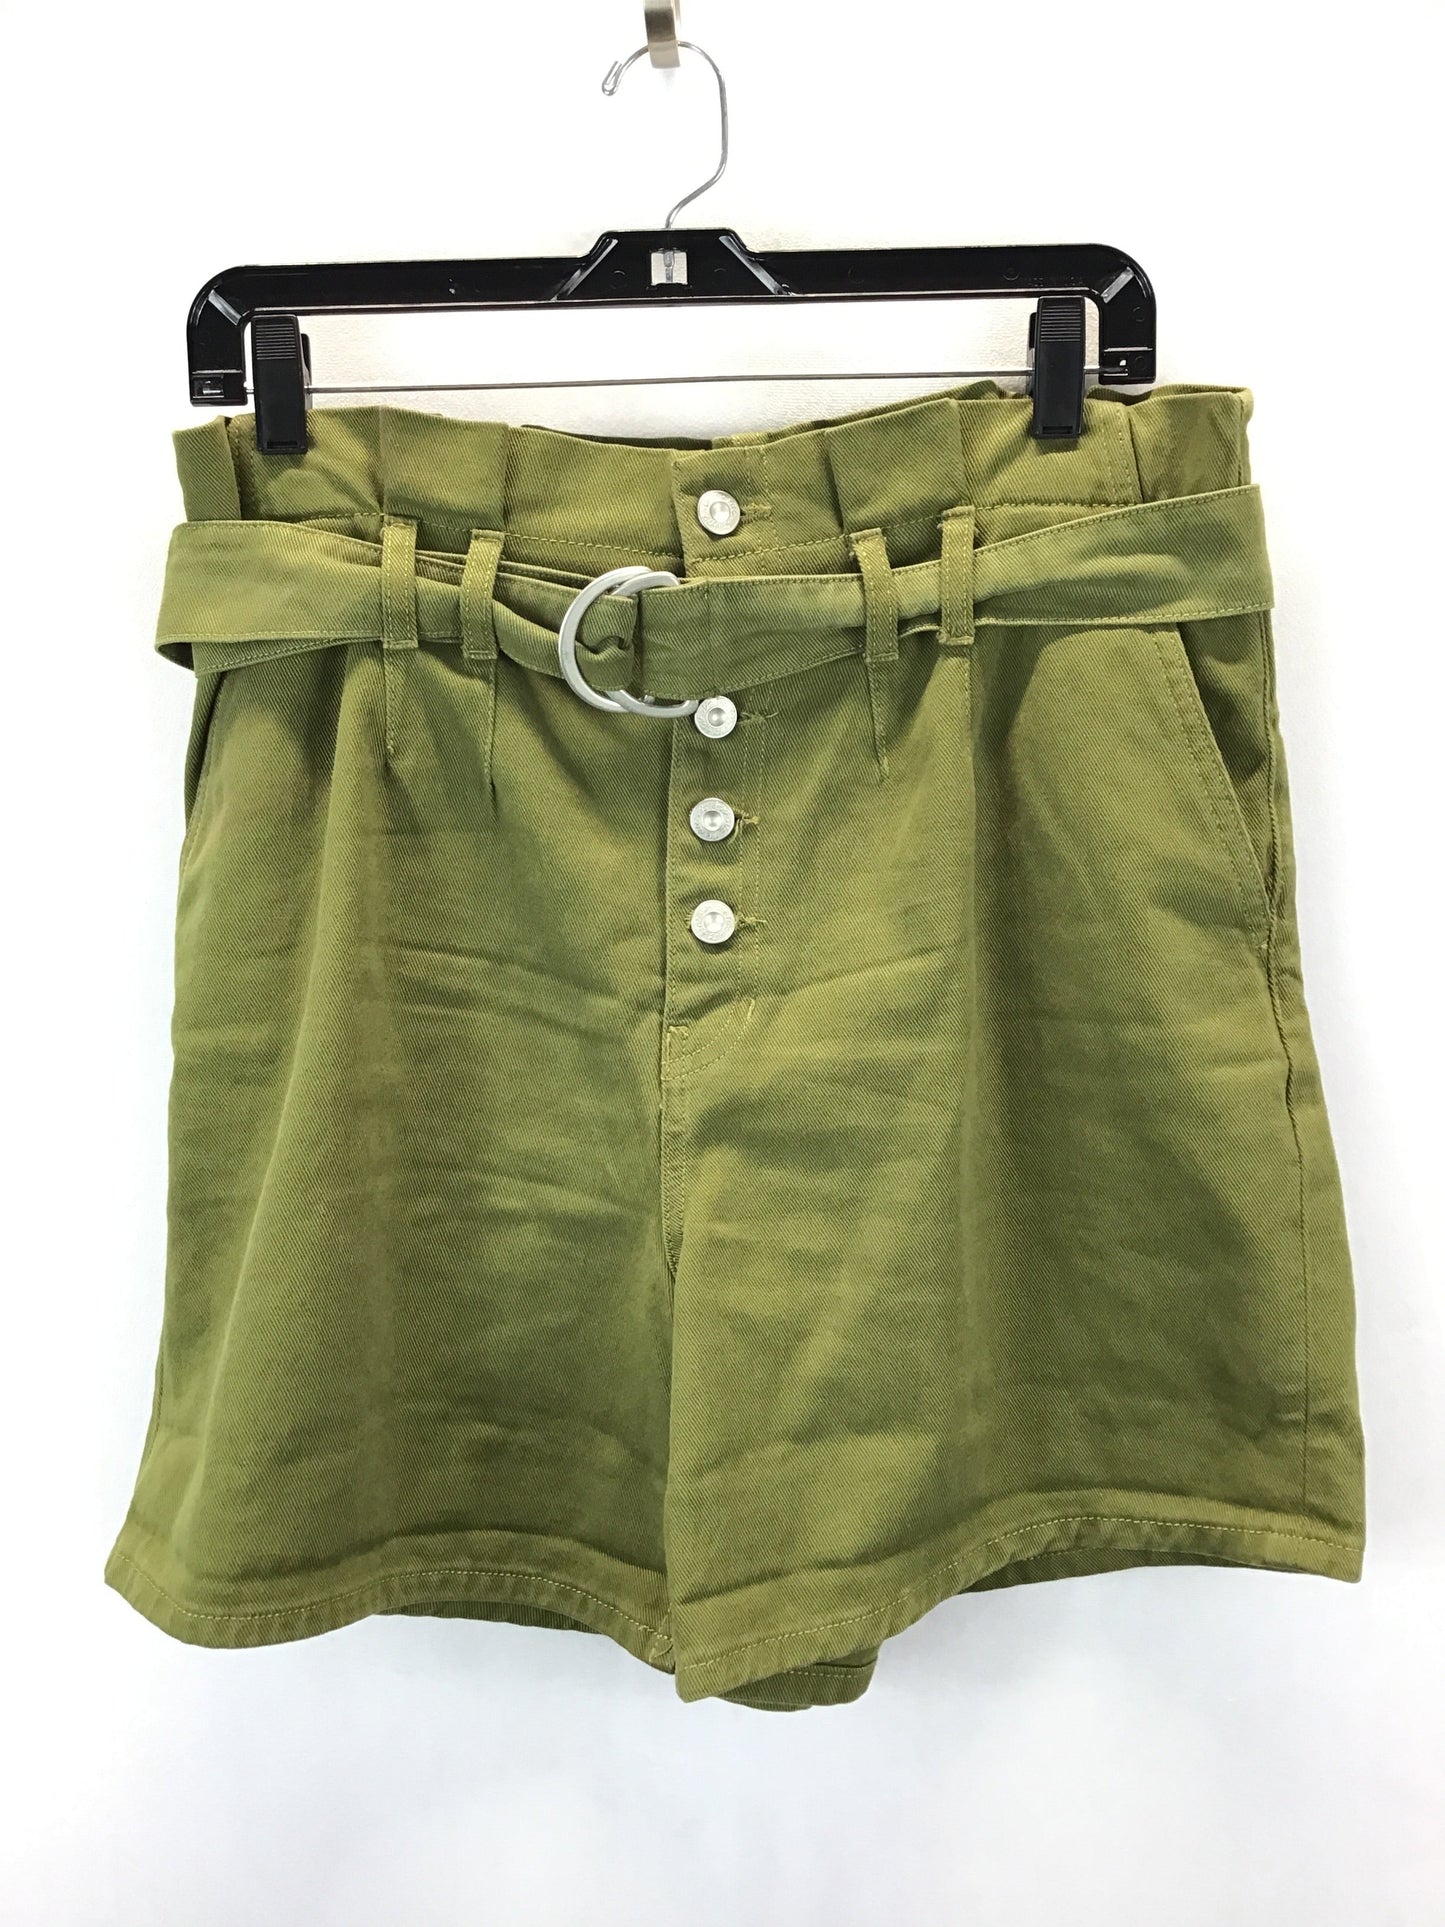 Green Shorts Free People, Size 6